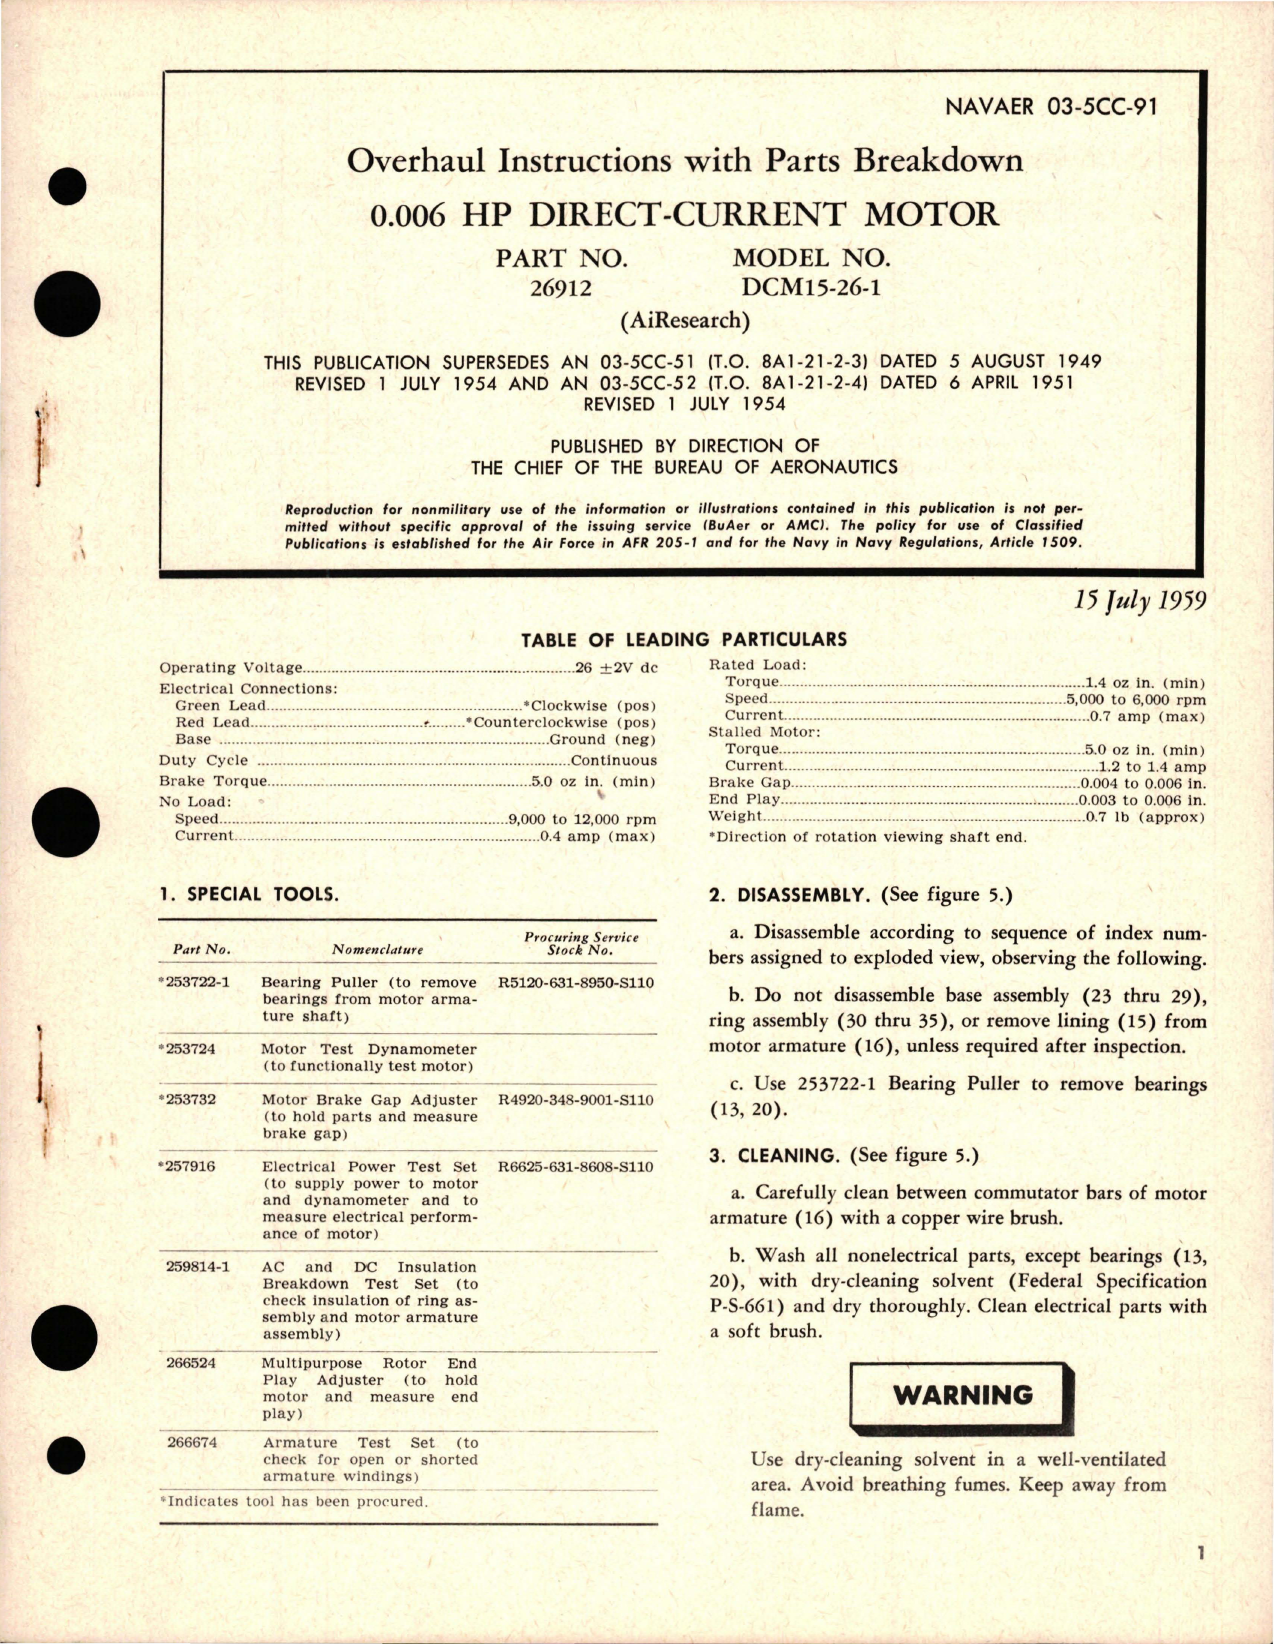 Sample page 1 from AirCorps Library document: Overhaul Instructions with Parts Breakdown for Direct-Current Motor - 0.006 HP - Part 26912 - Model DCM15-26-1